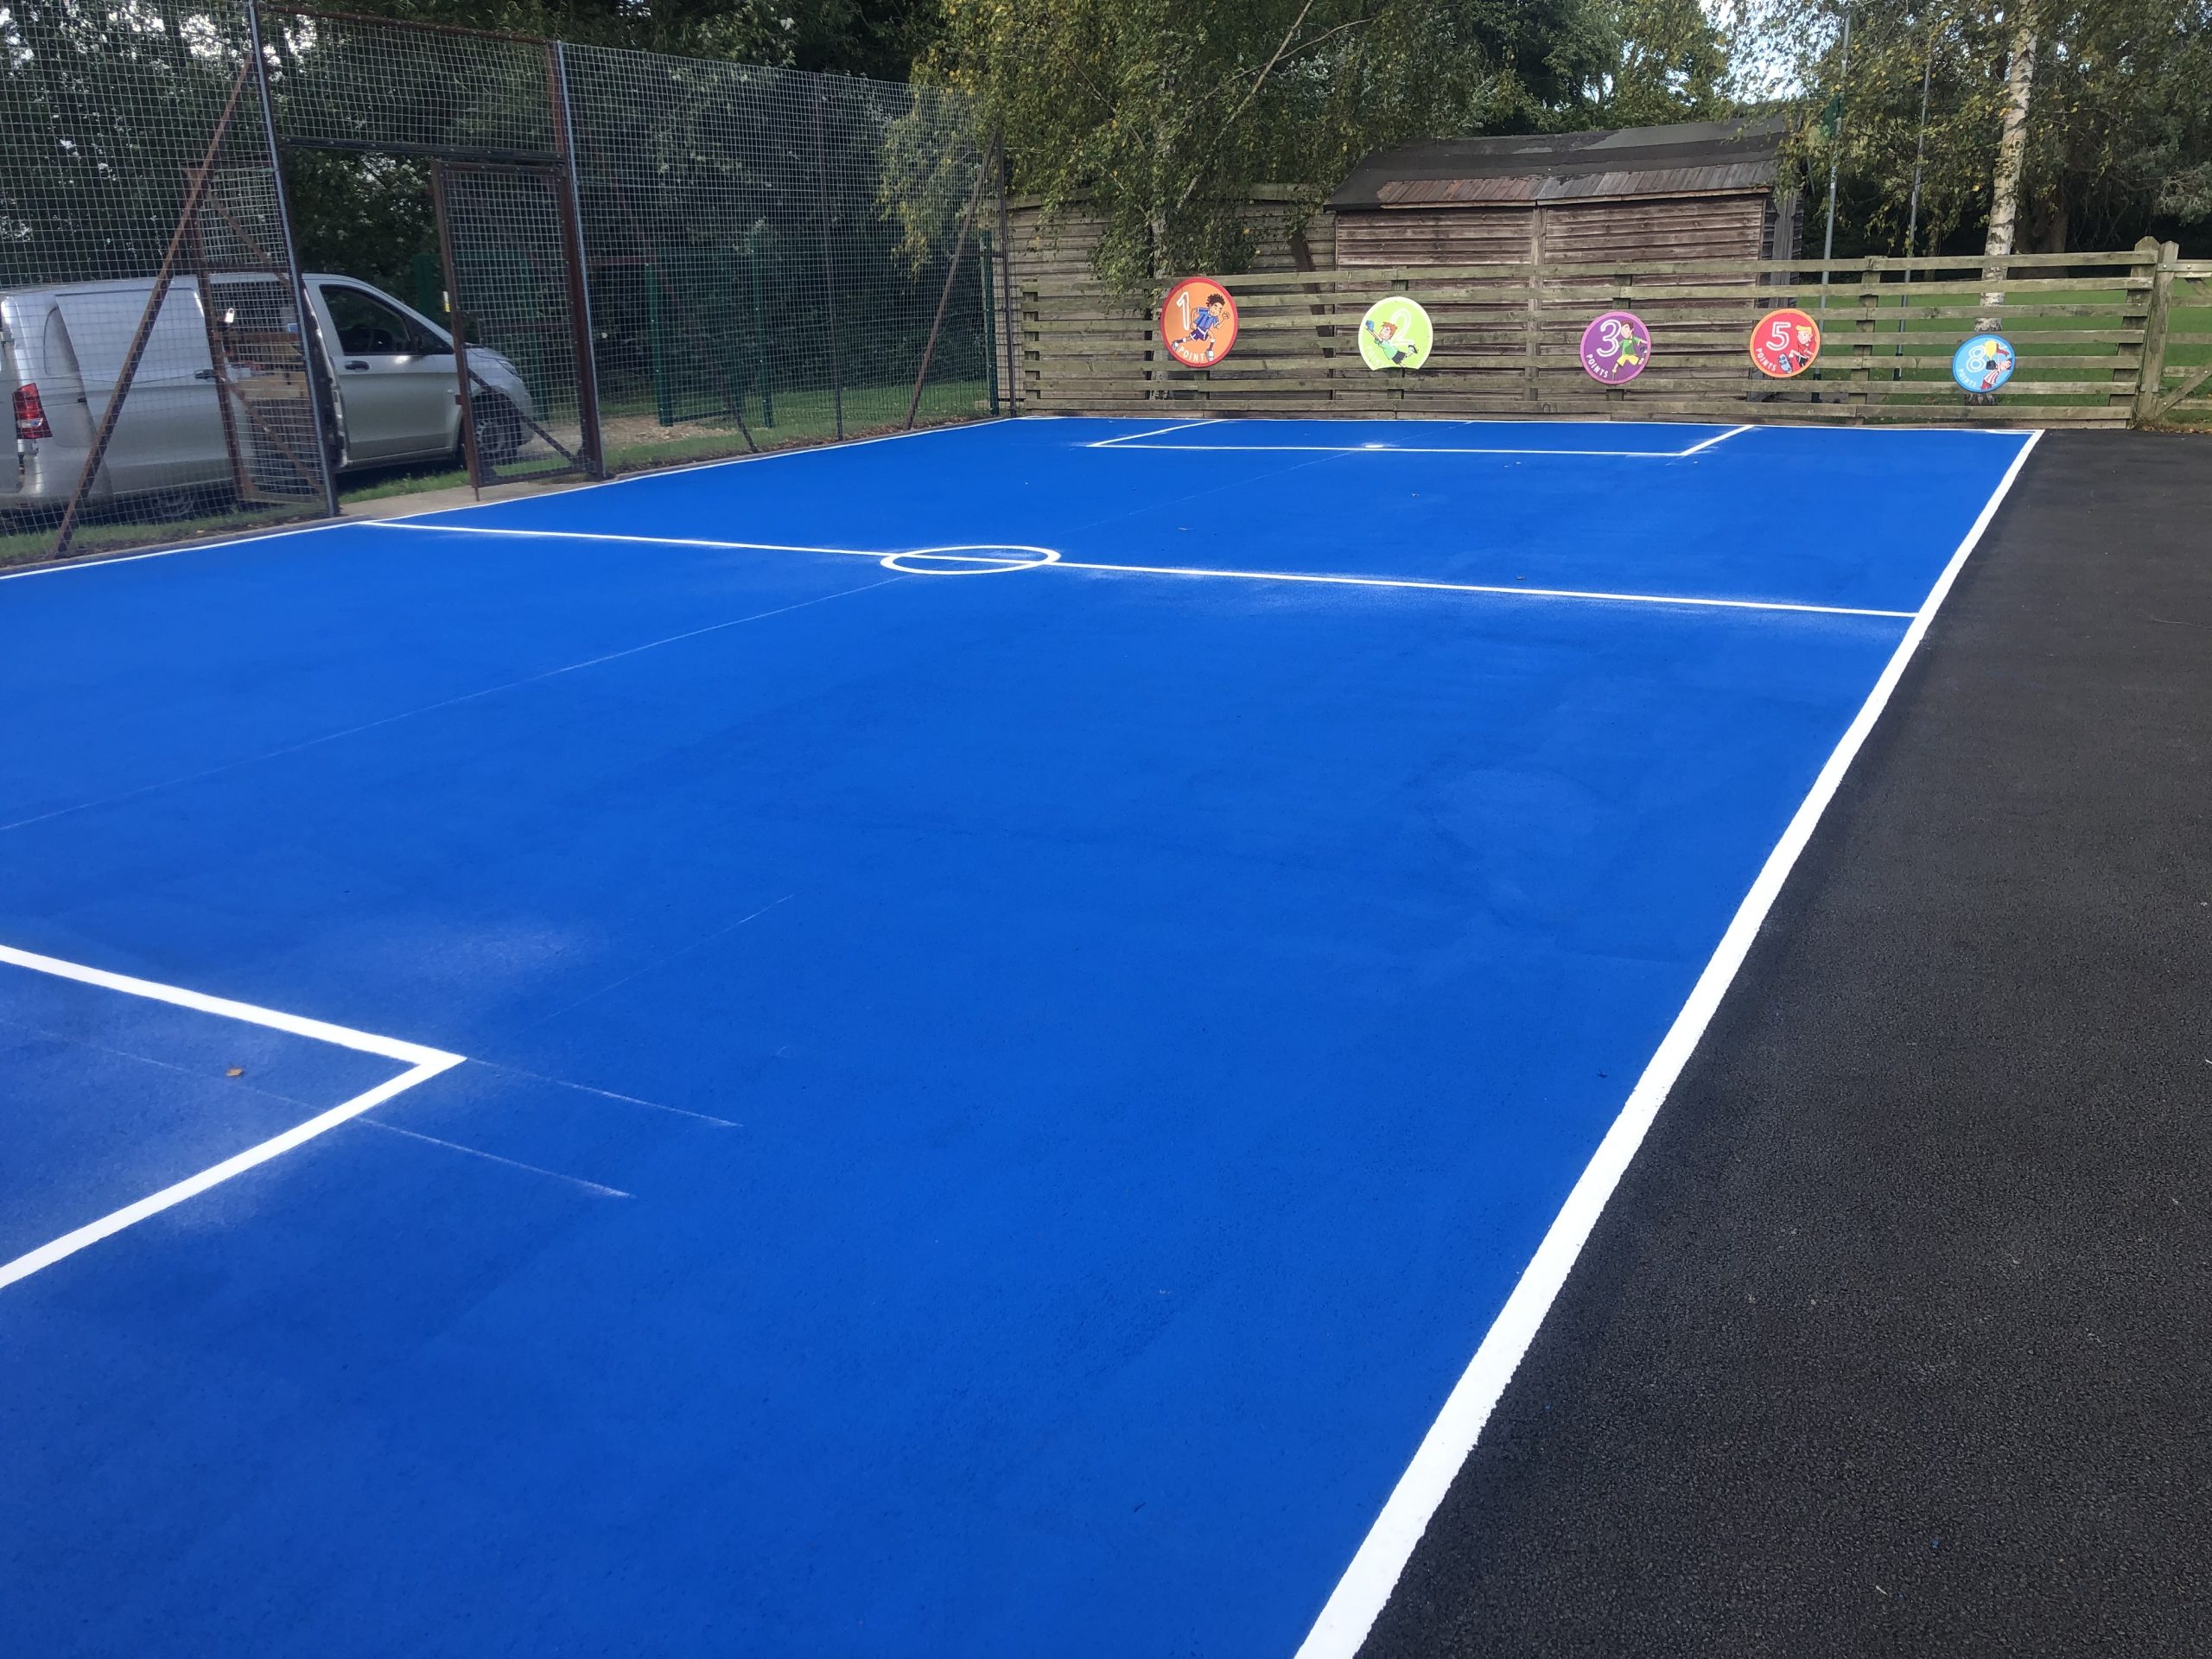 Creating a multi-functional playground with sports court markings